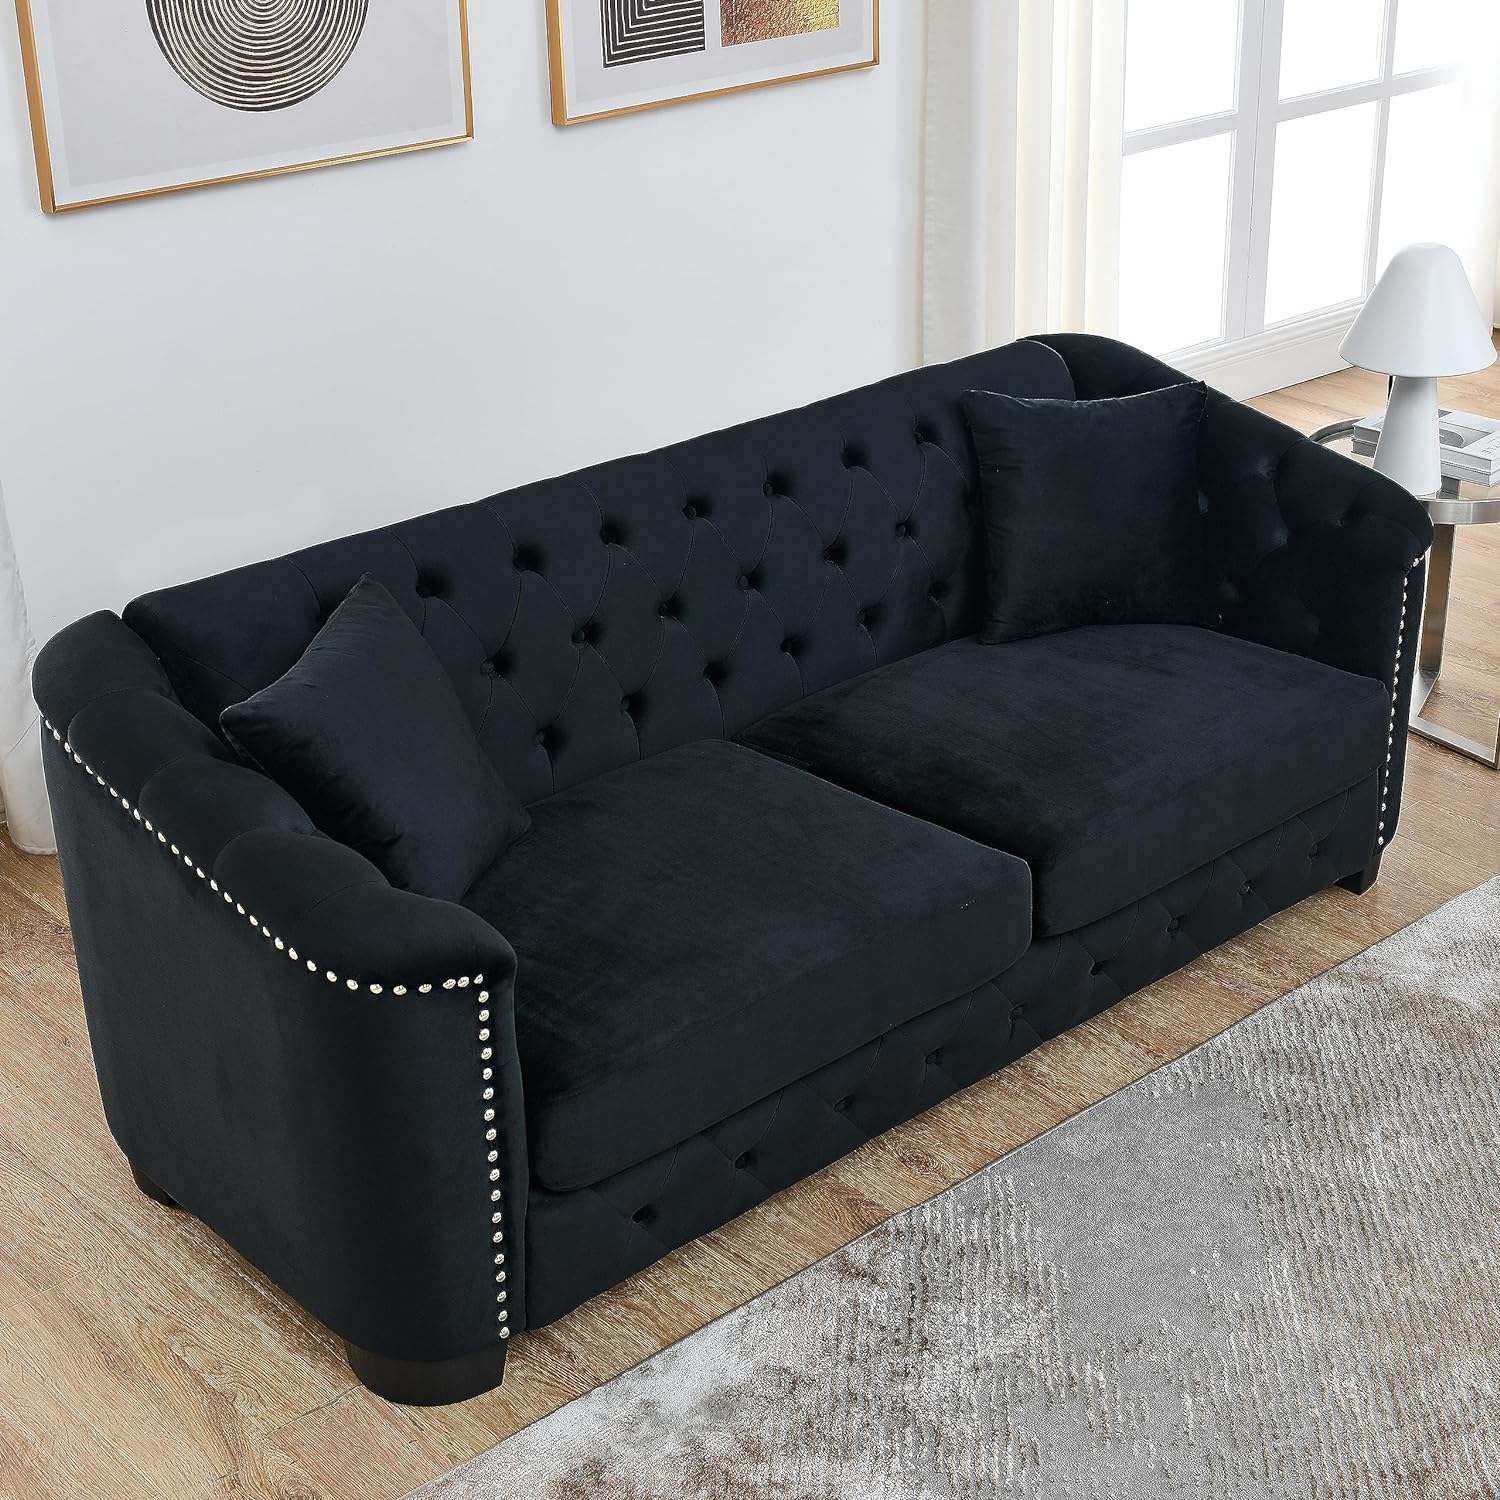 WILLIAMSPACE 77 Velvet Sectional Sofa Couch for Living Room, Modern Chesterfield Sofa 3-Seater Couch, Upholstered Tufted Backrests with Nailhead Arms and 2 Cushions for Apartment Office (Black)